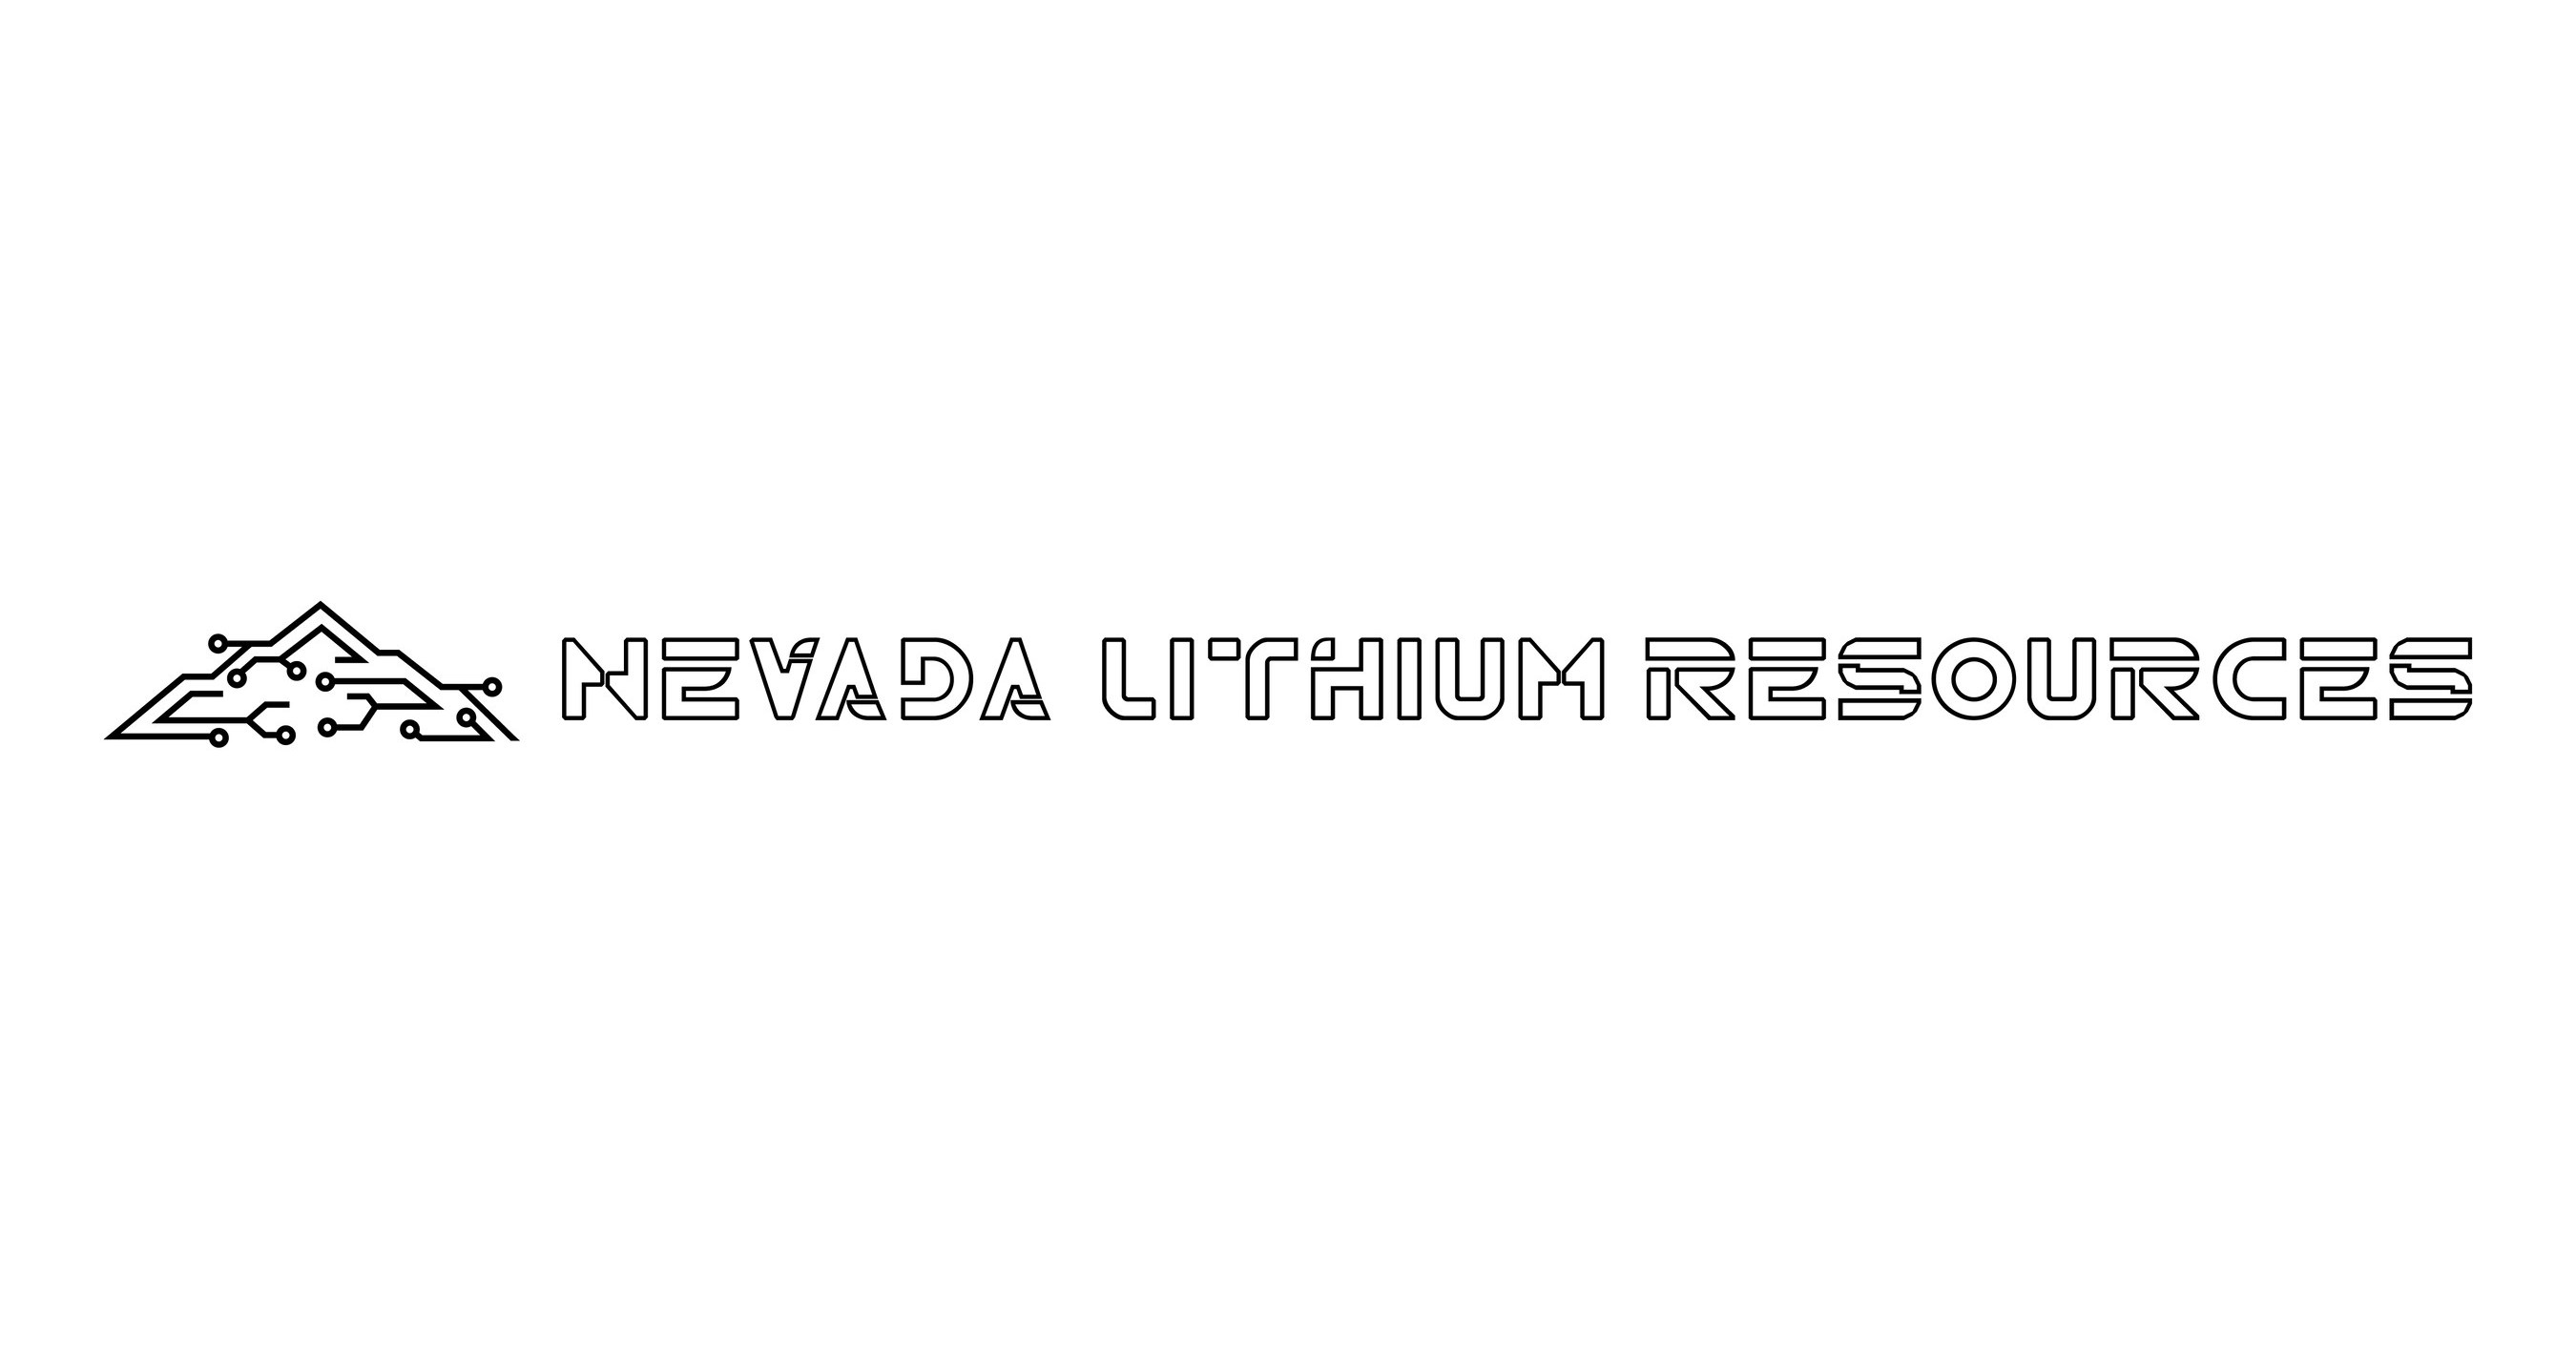 Bureau Of Land Management Approves Exploration Plan Of Operations For The Bonnie Claire Lithium 4508